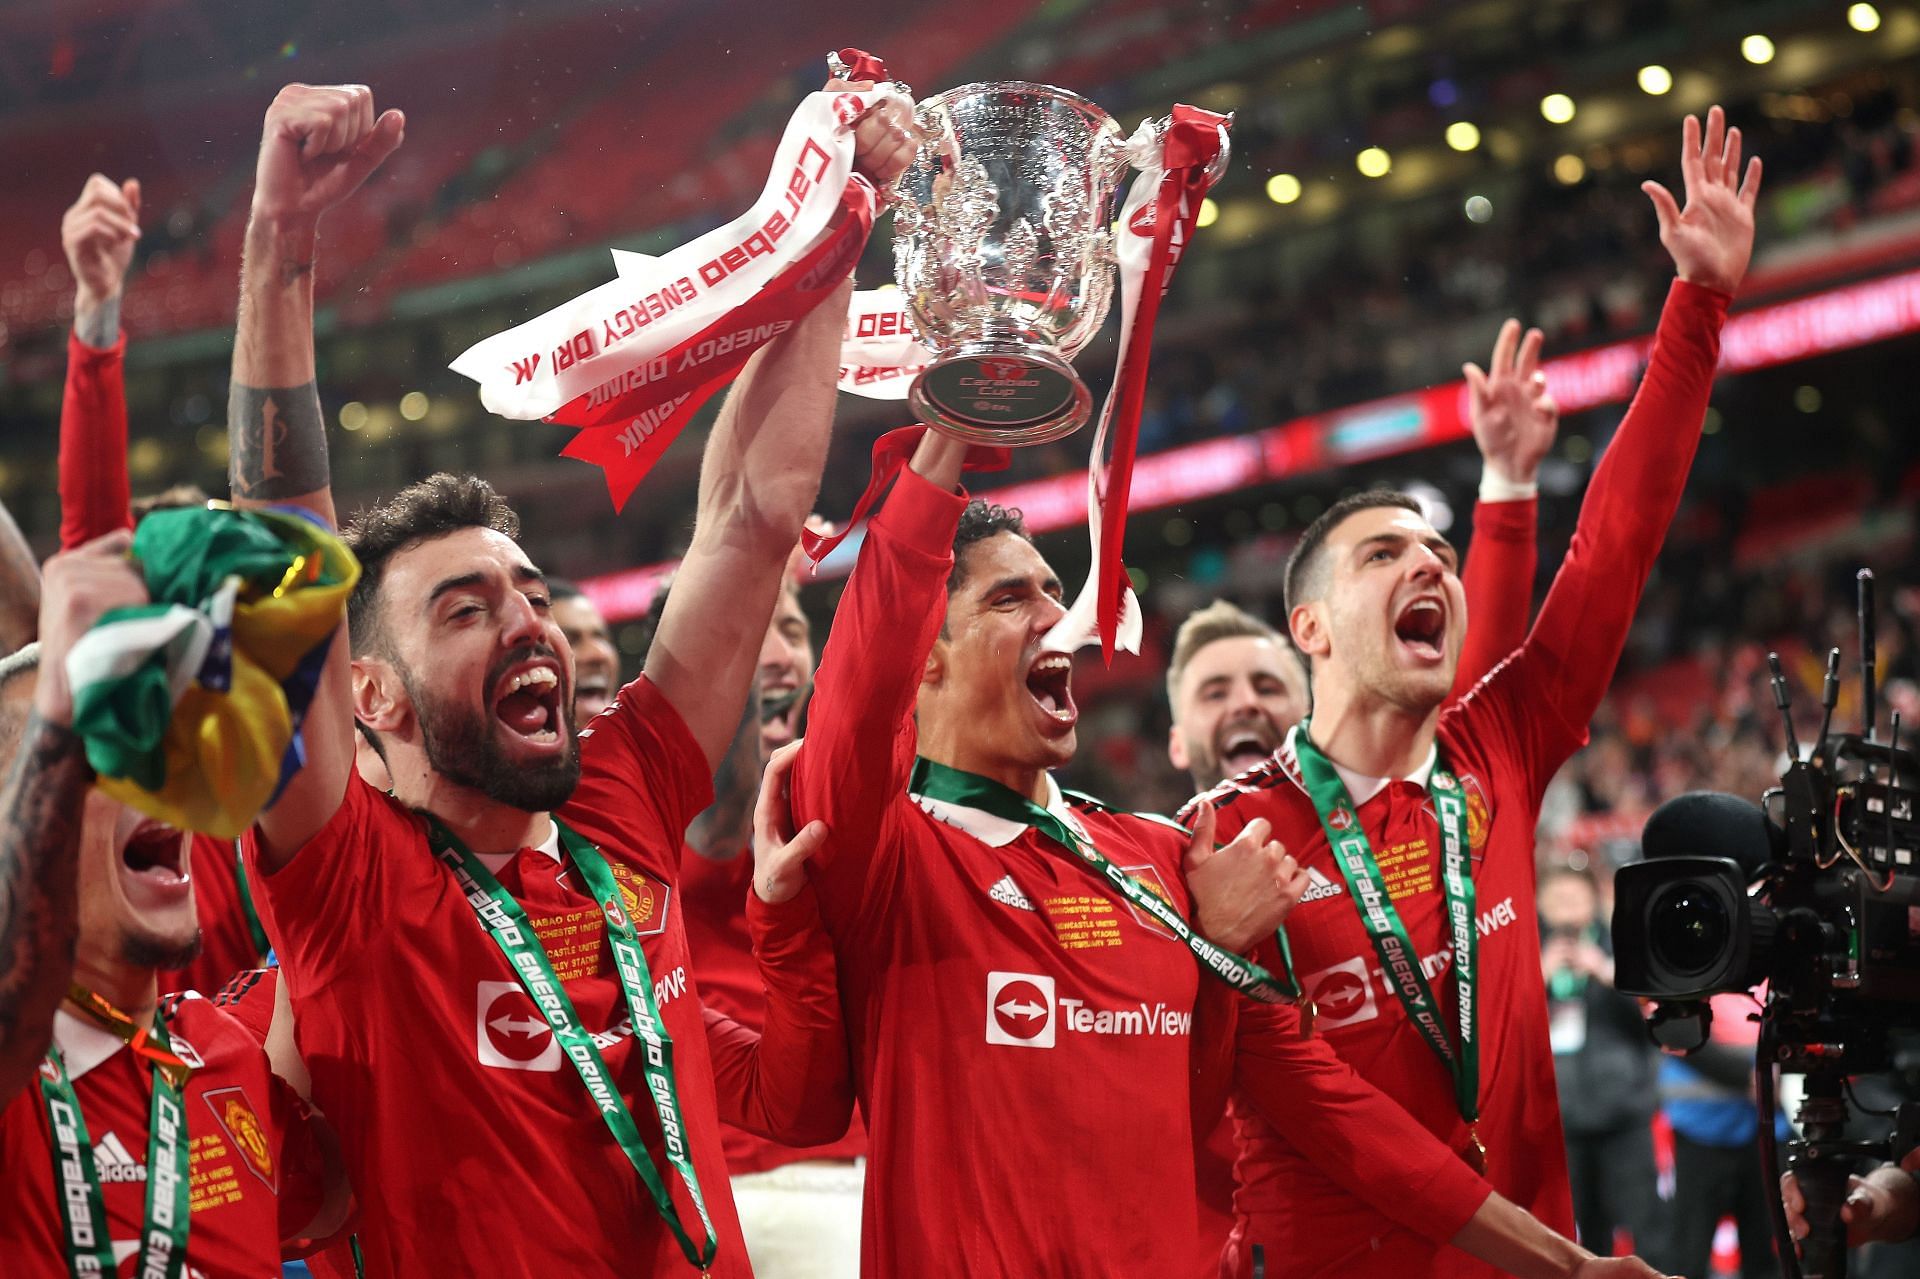 Bruno Fernandes helped Manchester United win the Carabao Cup last season.